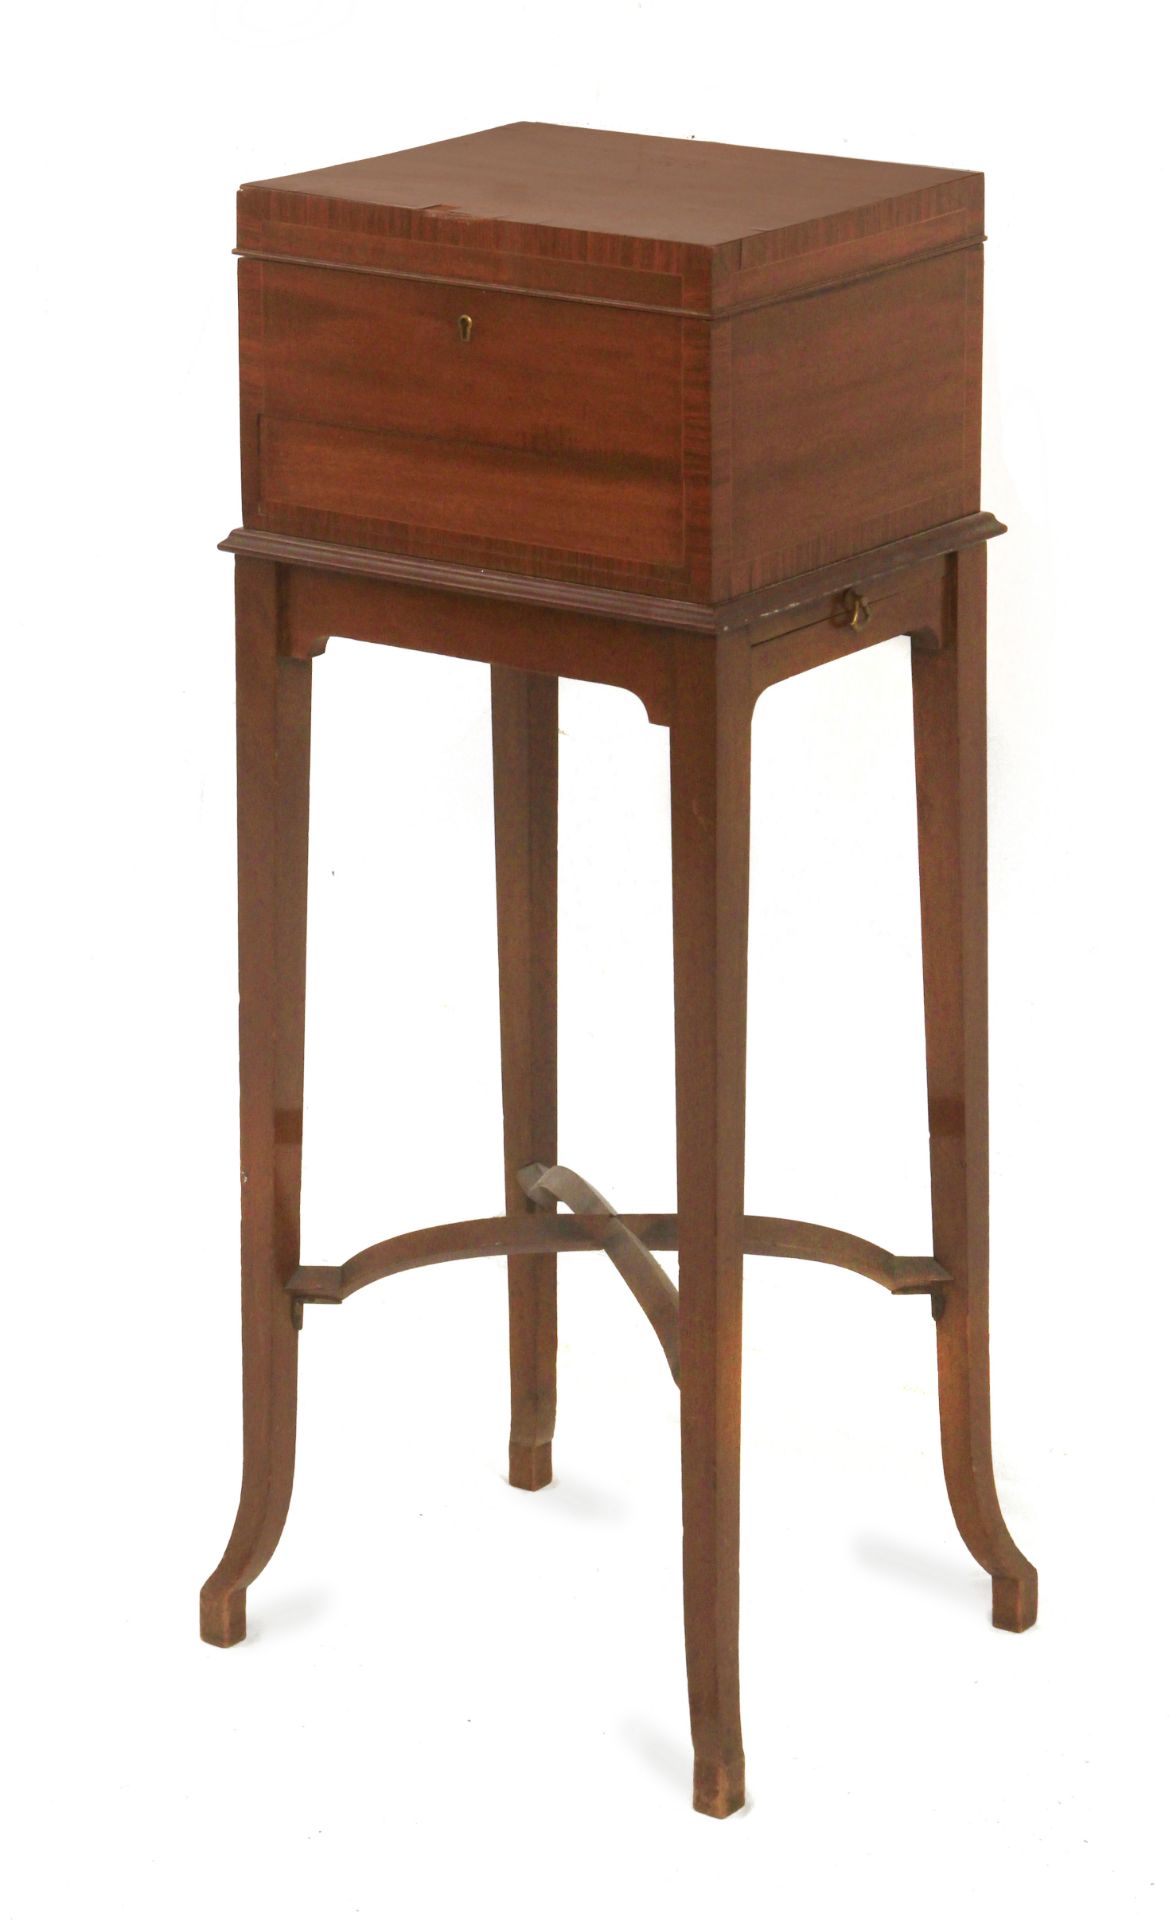 A 19th century Victorian mahogany sewing table wirh rosewood and boxwood marquetry - Image 2 of 4